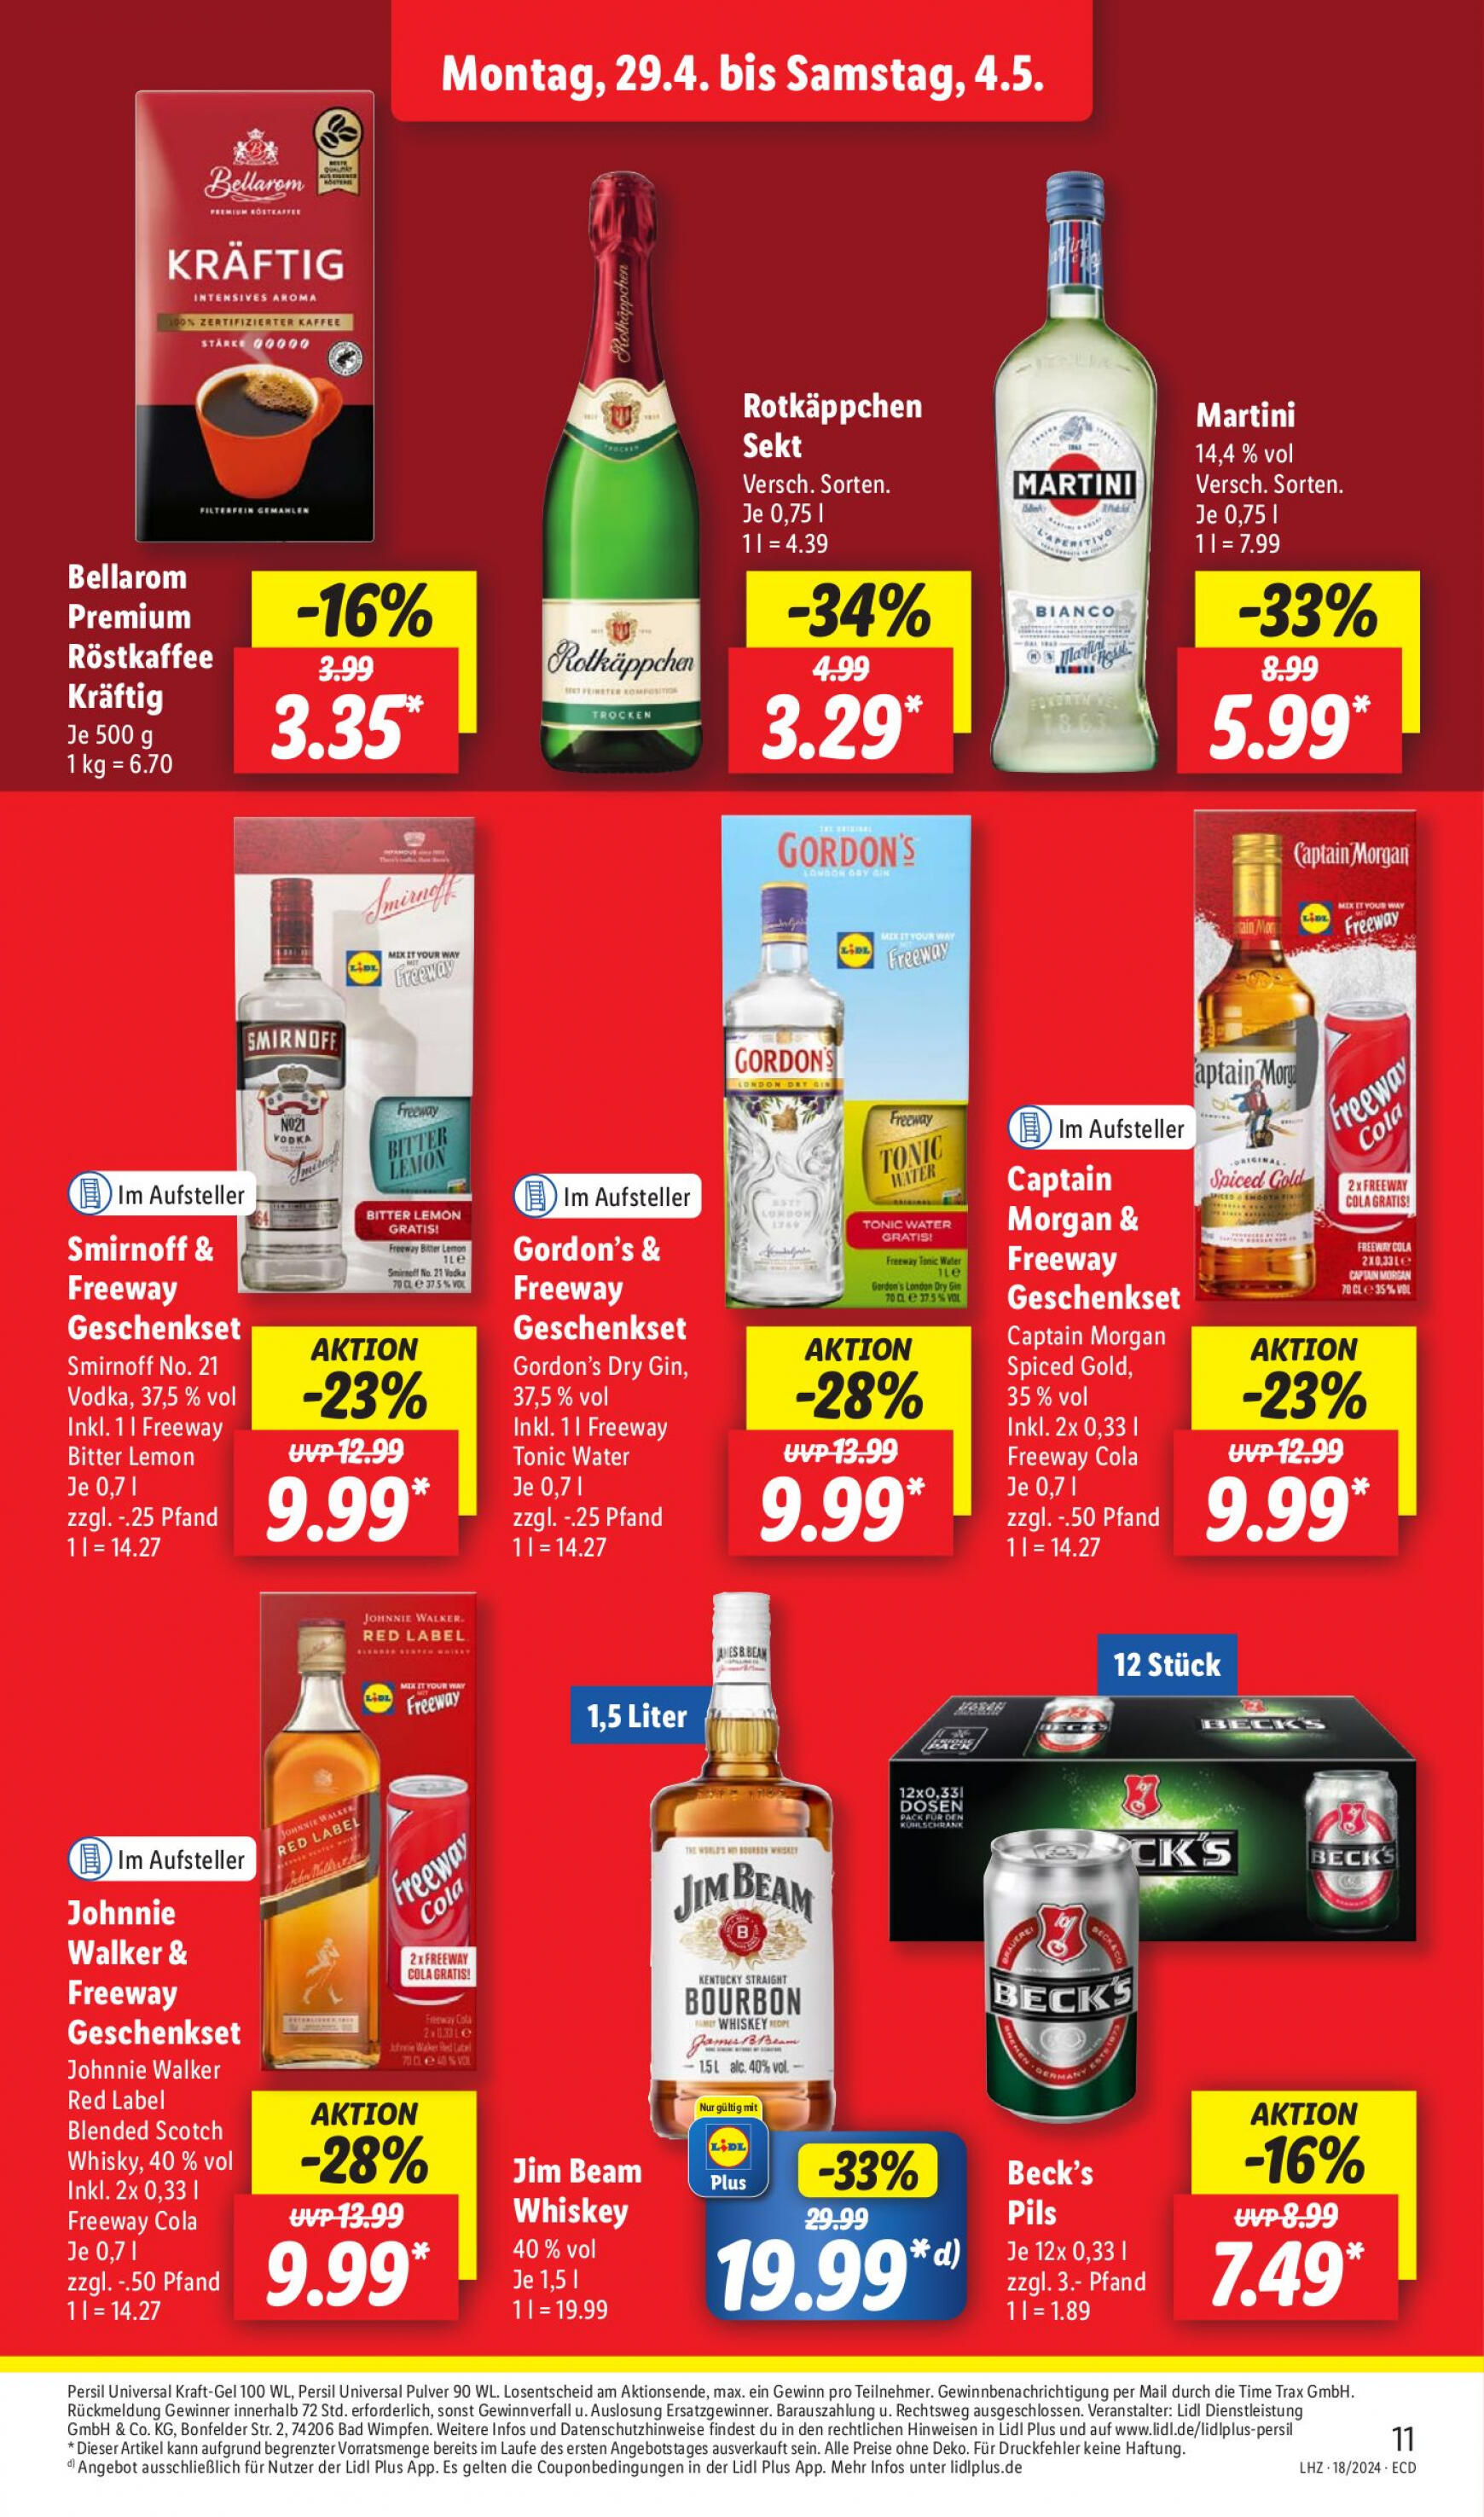 lidl - Flyer Lidl aktuell 29.04. - 04.05. - page: 15